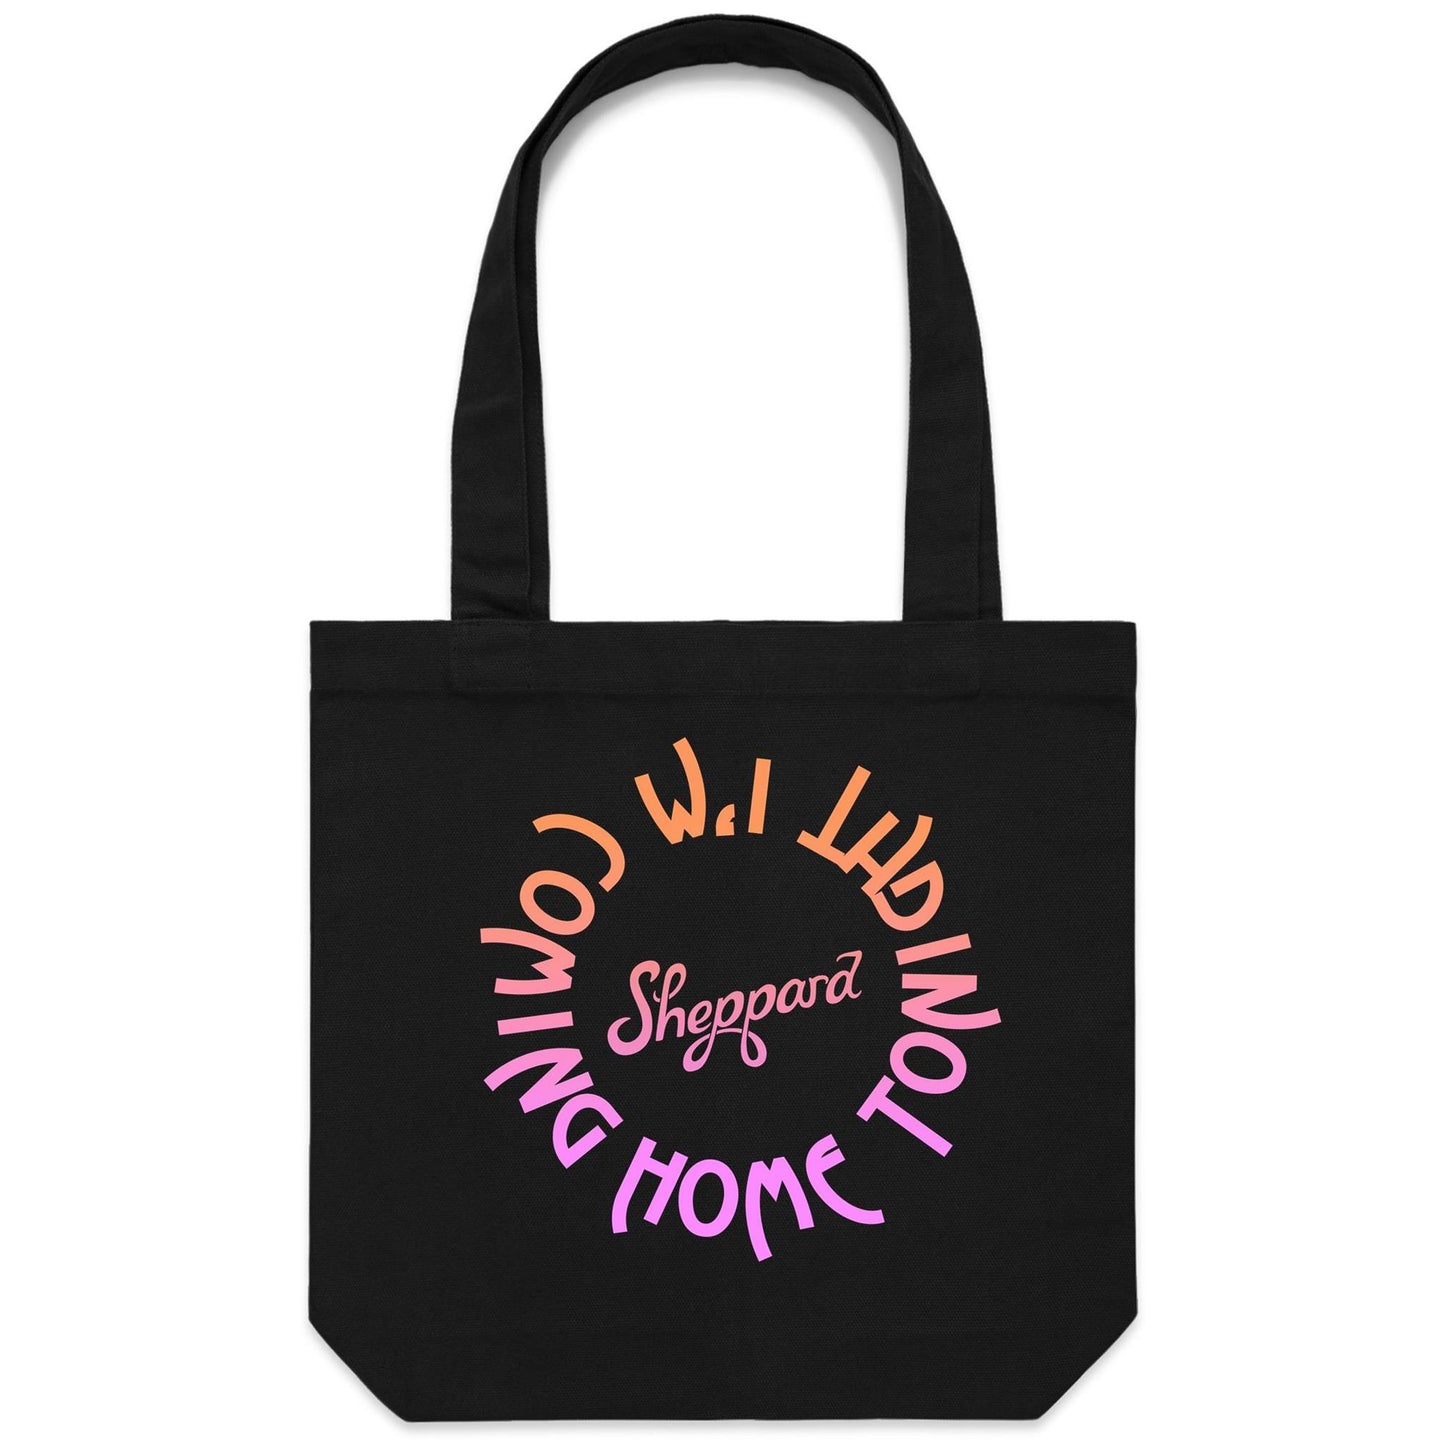 NEW! Coming Home - Canvas Tote Bag